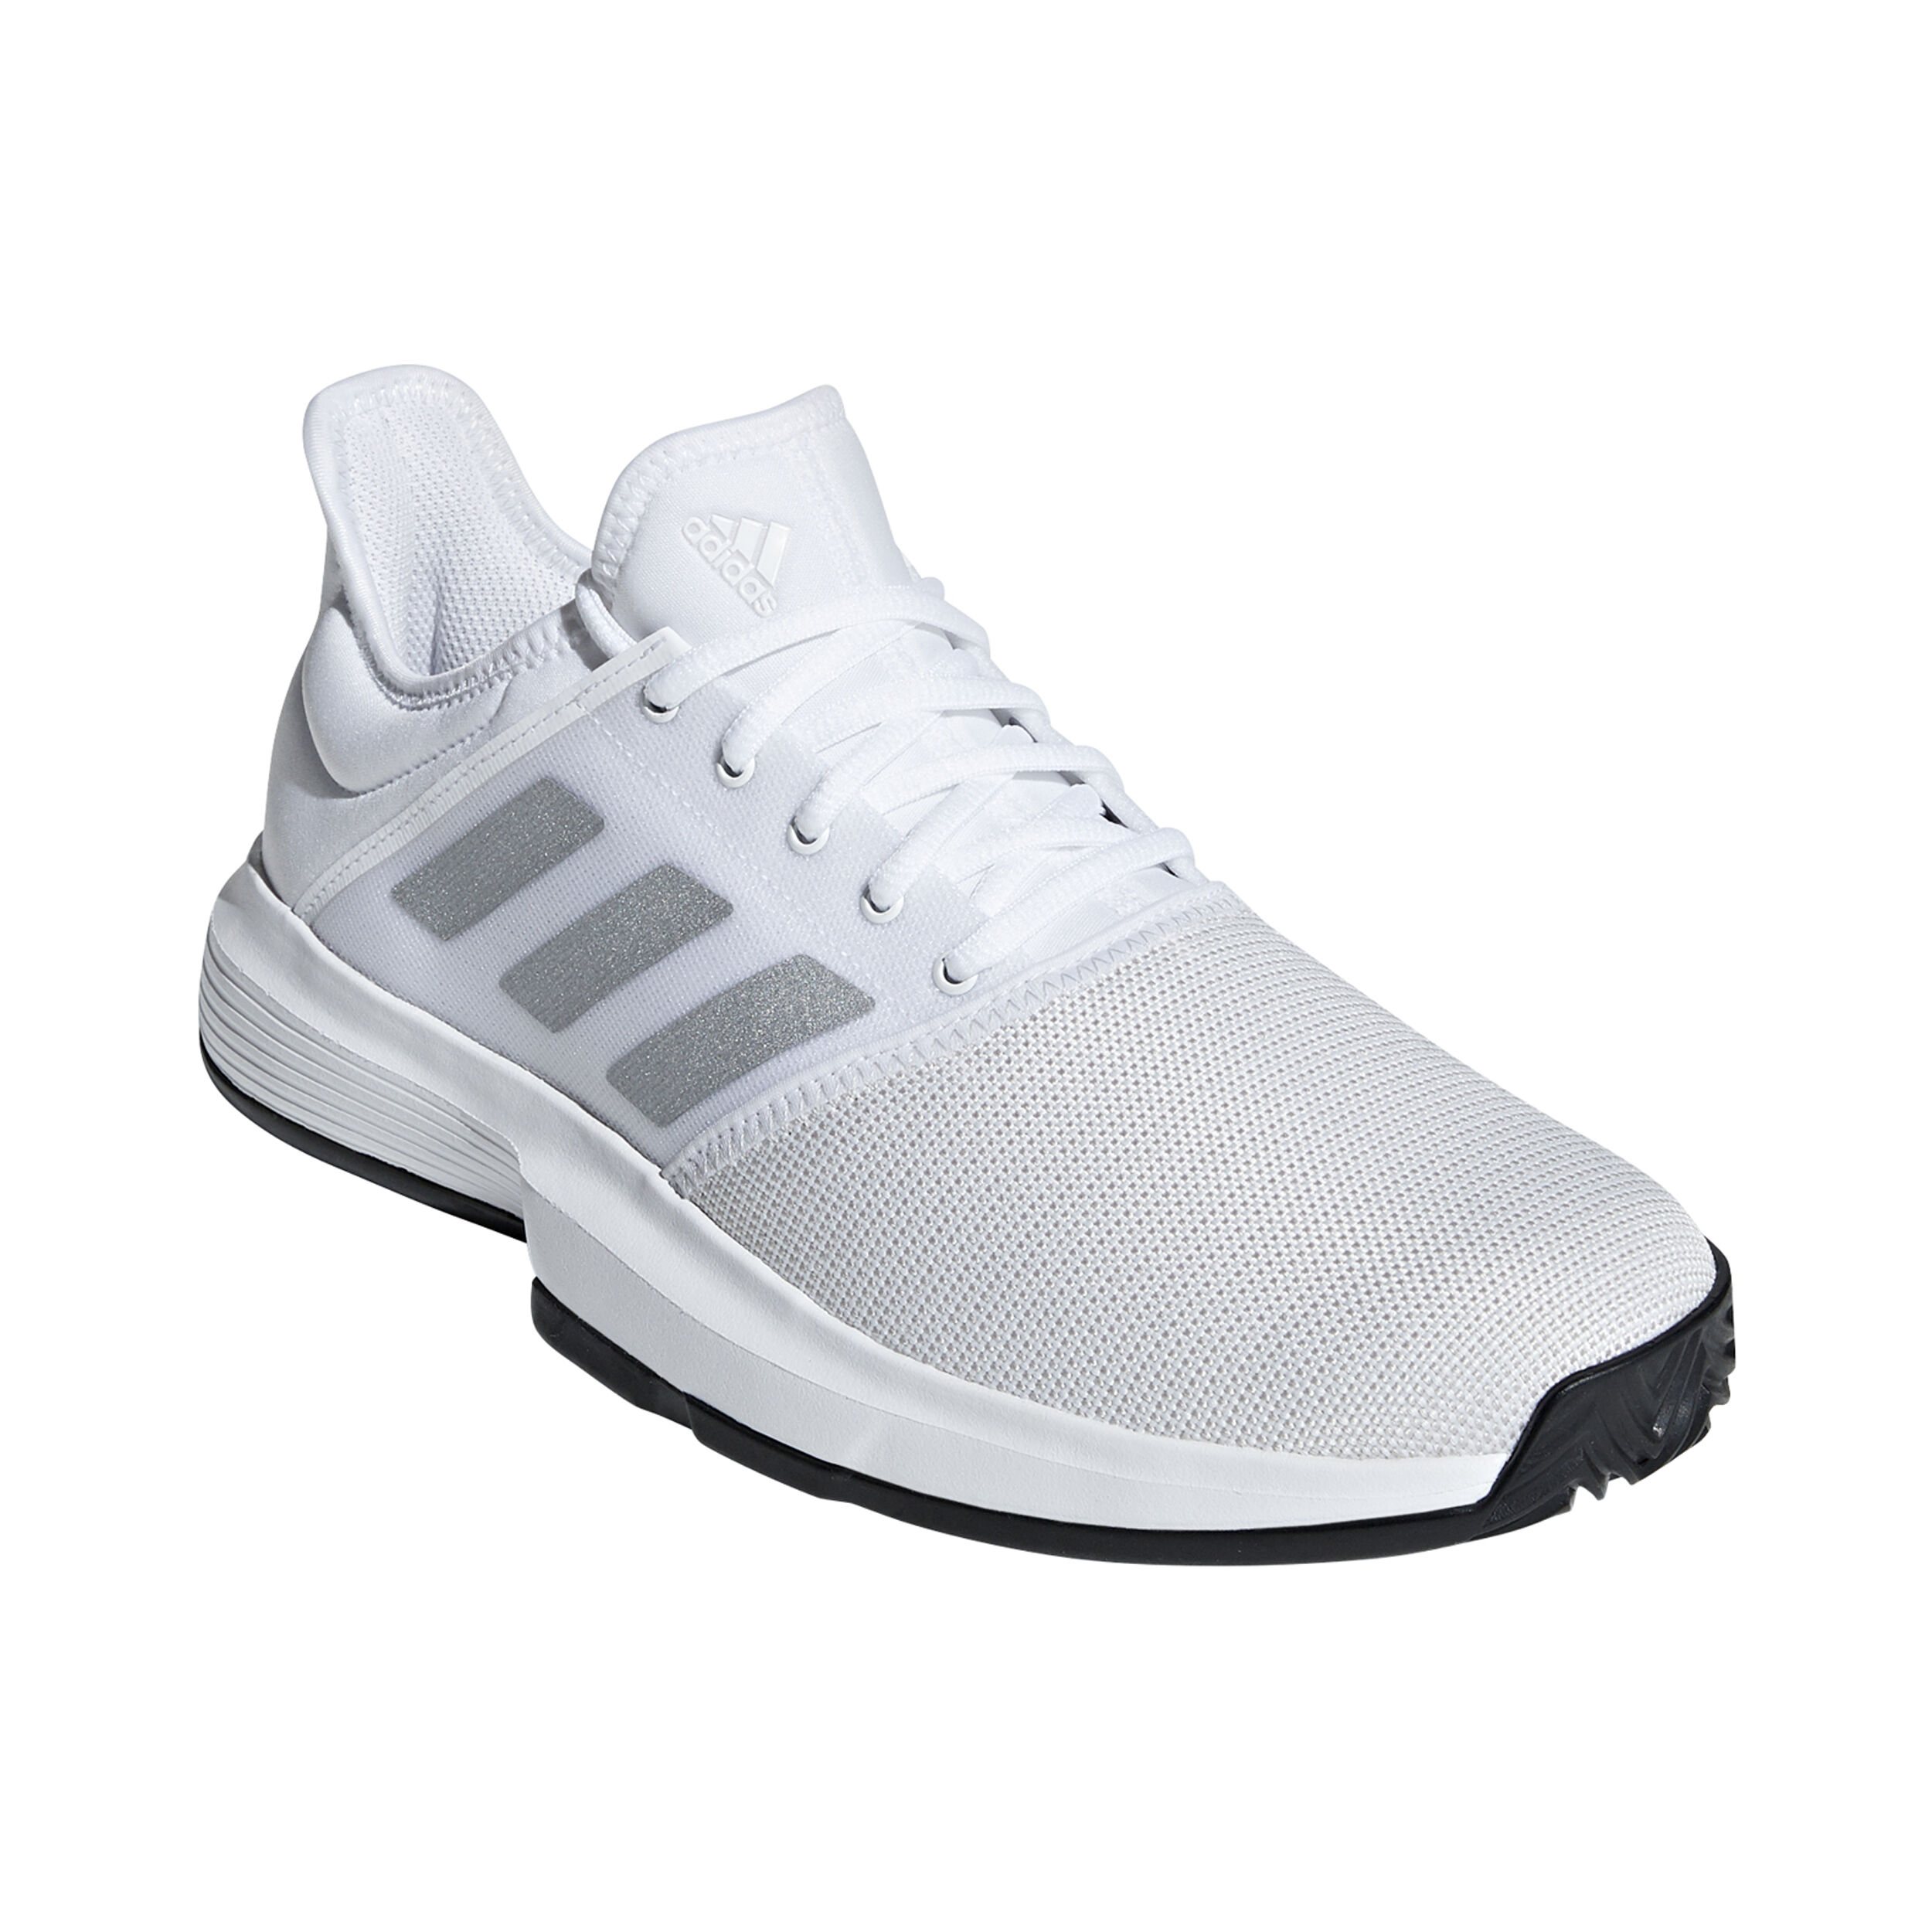 adidas game court mens tennis shoes